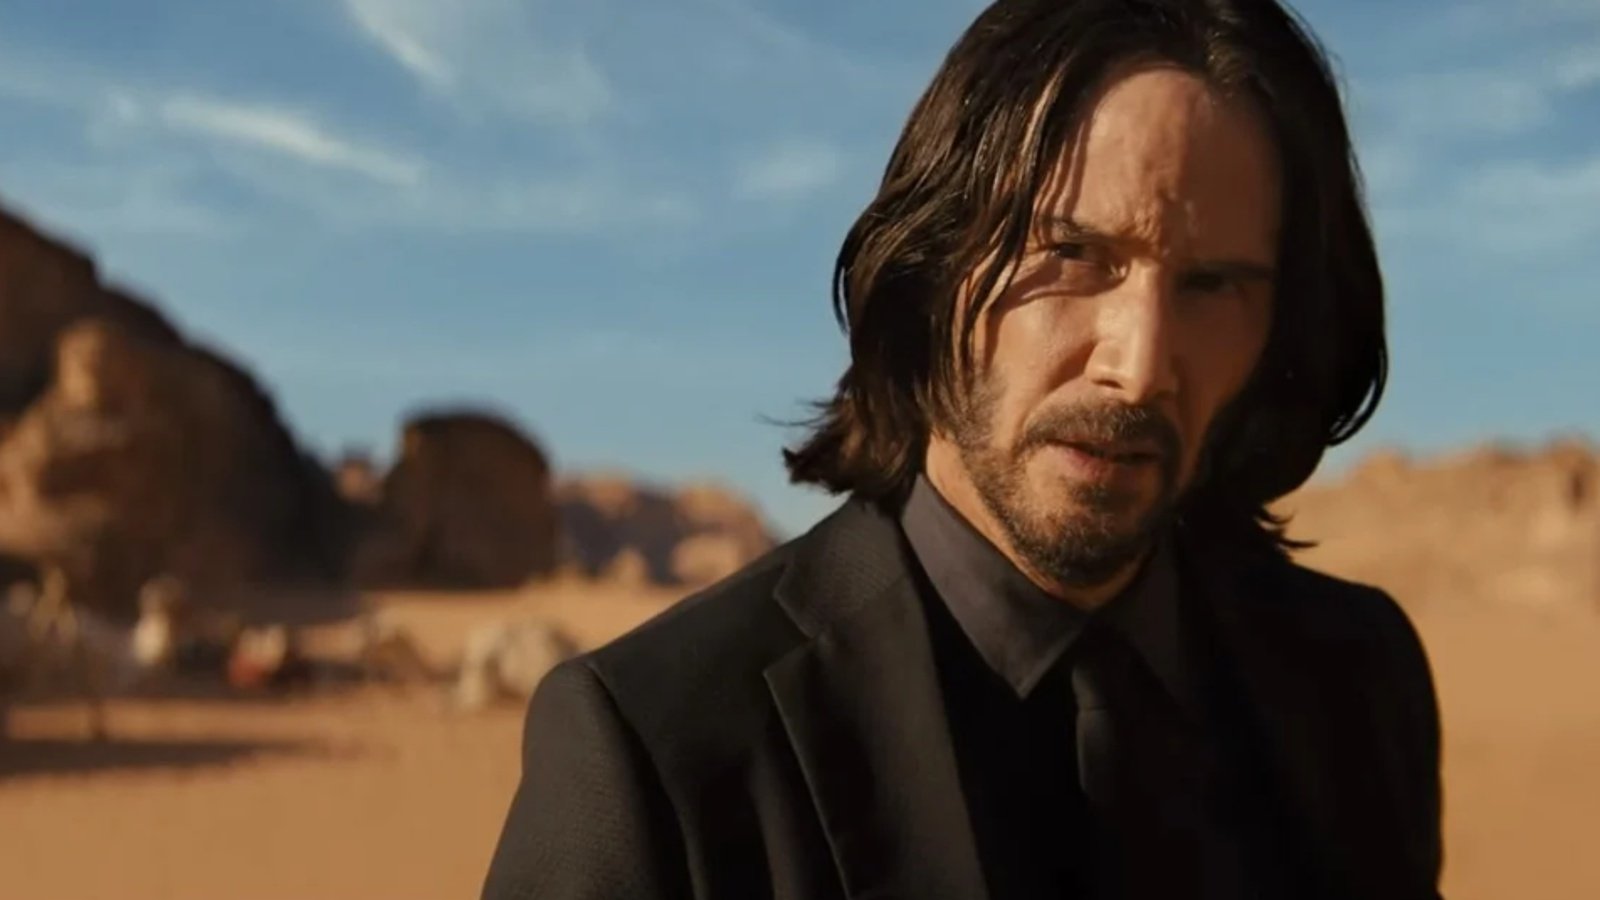 John Wick 4: Keanu Reeves Begged Producers to Kill Him, 'But They Didn't Listen'